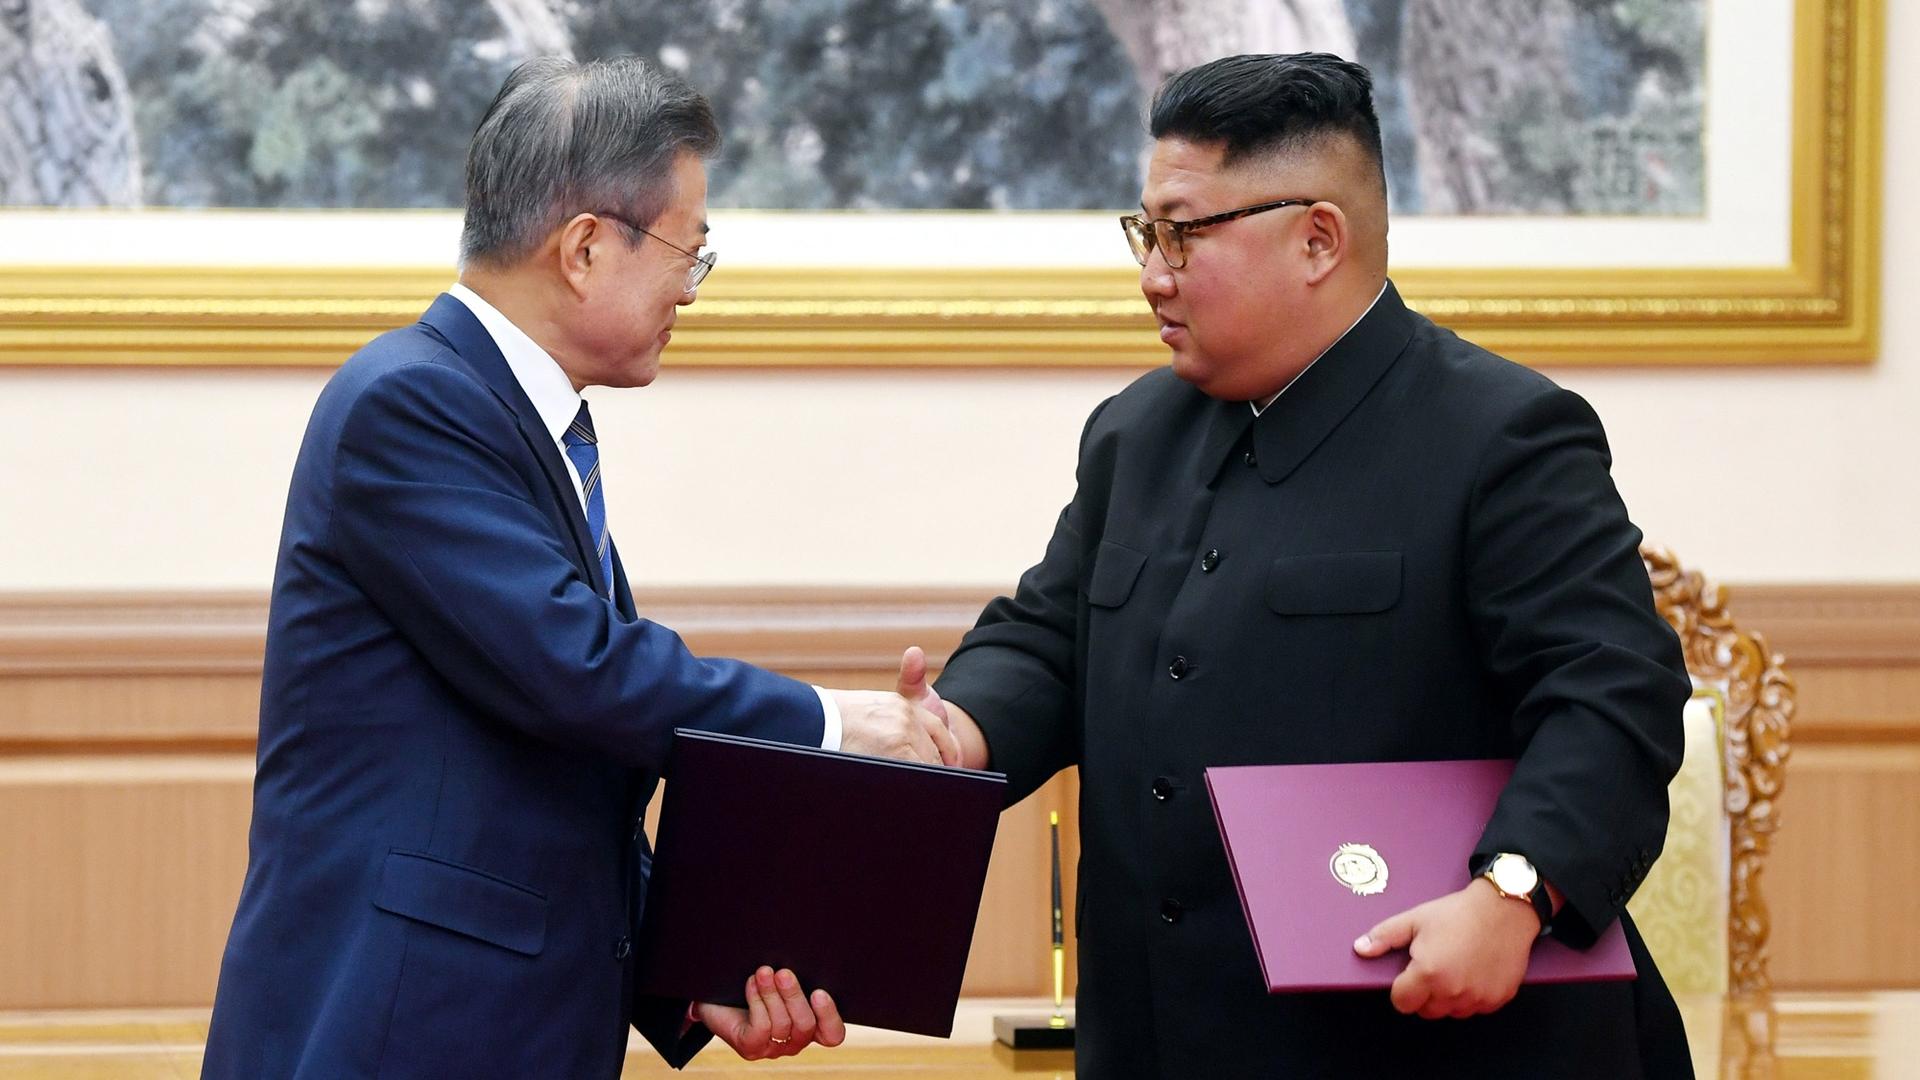 South Korean President Moon Jae-in shakes hands with North Korean leader Kim Jong-un with both carrying folders.